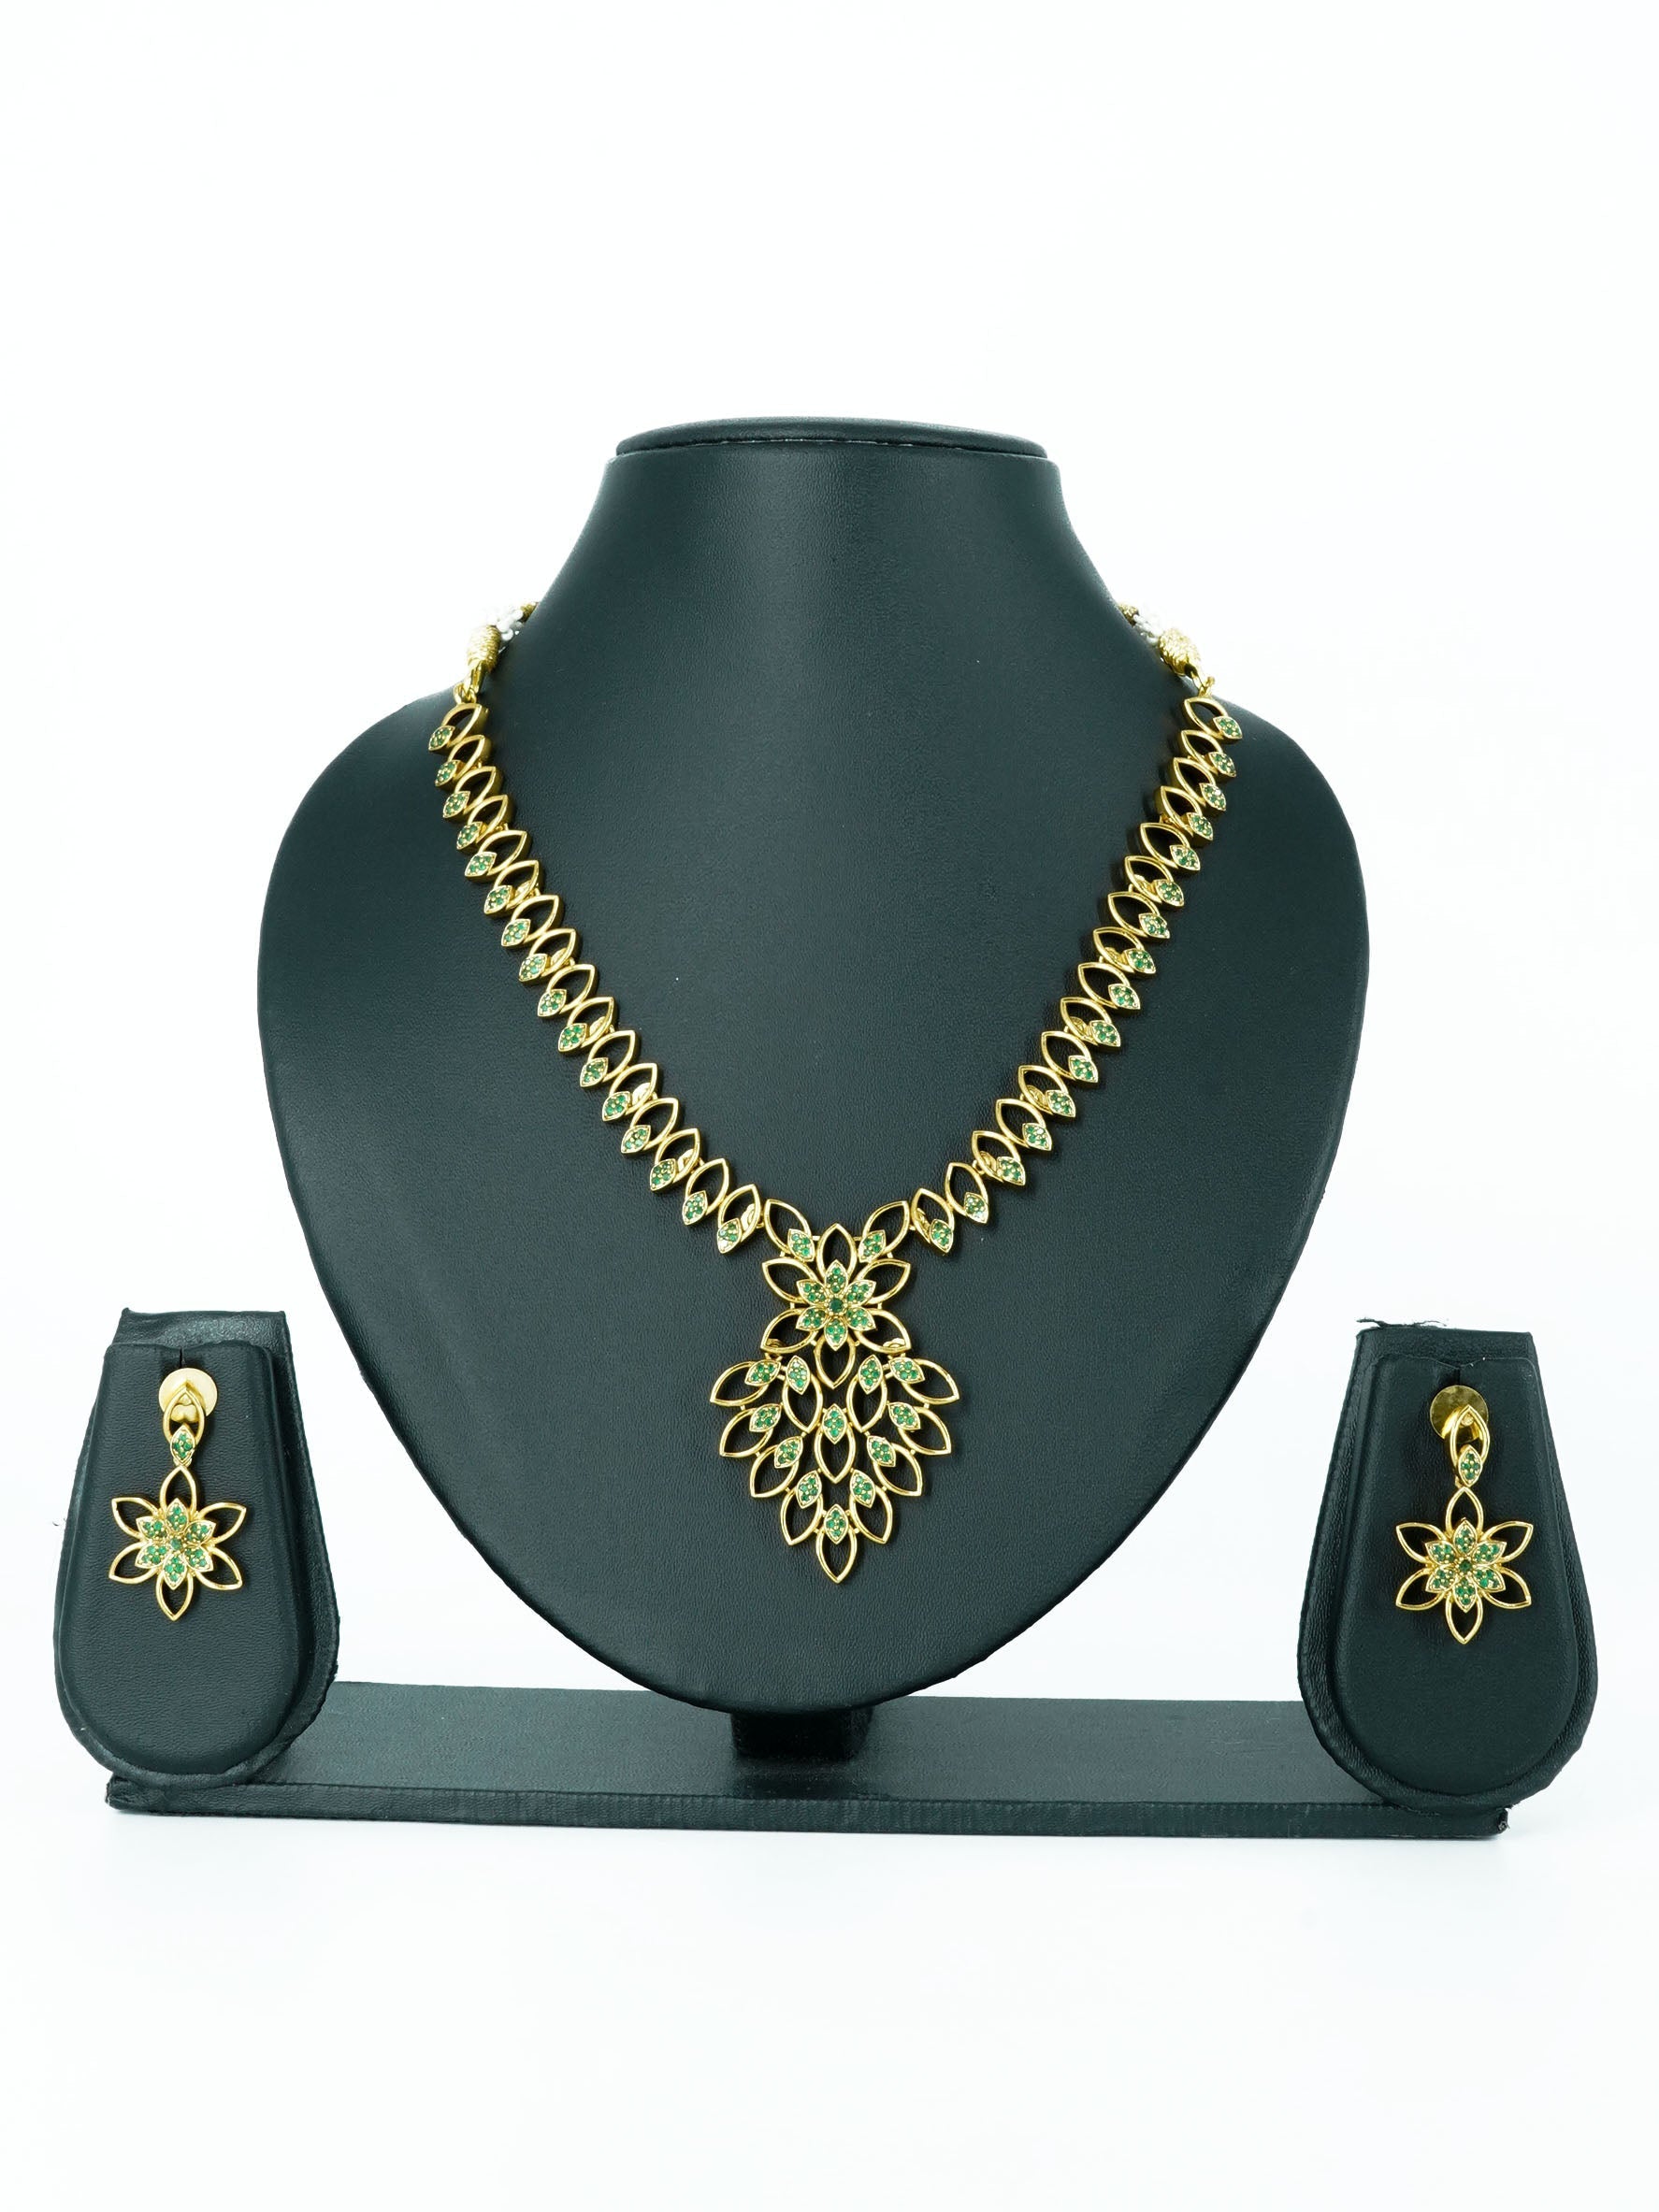 23.5kt Guaranteed Gold plated Trending designs Short AD necklace set 12783N